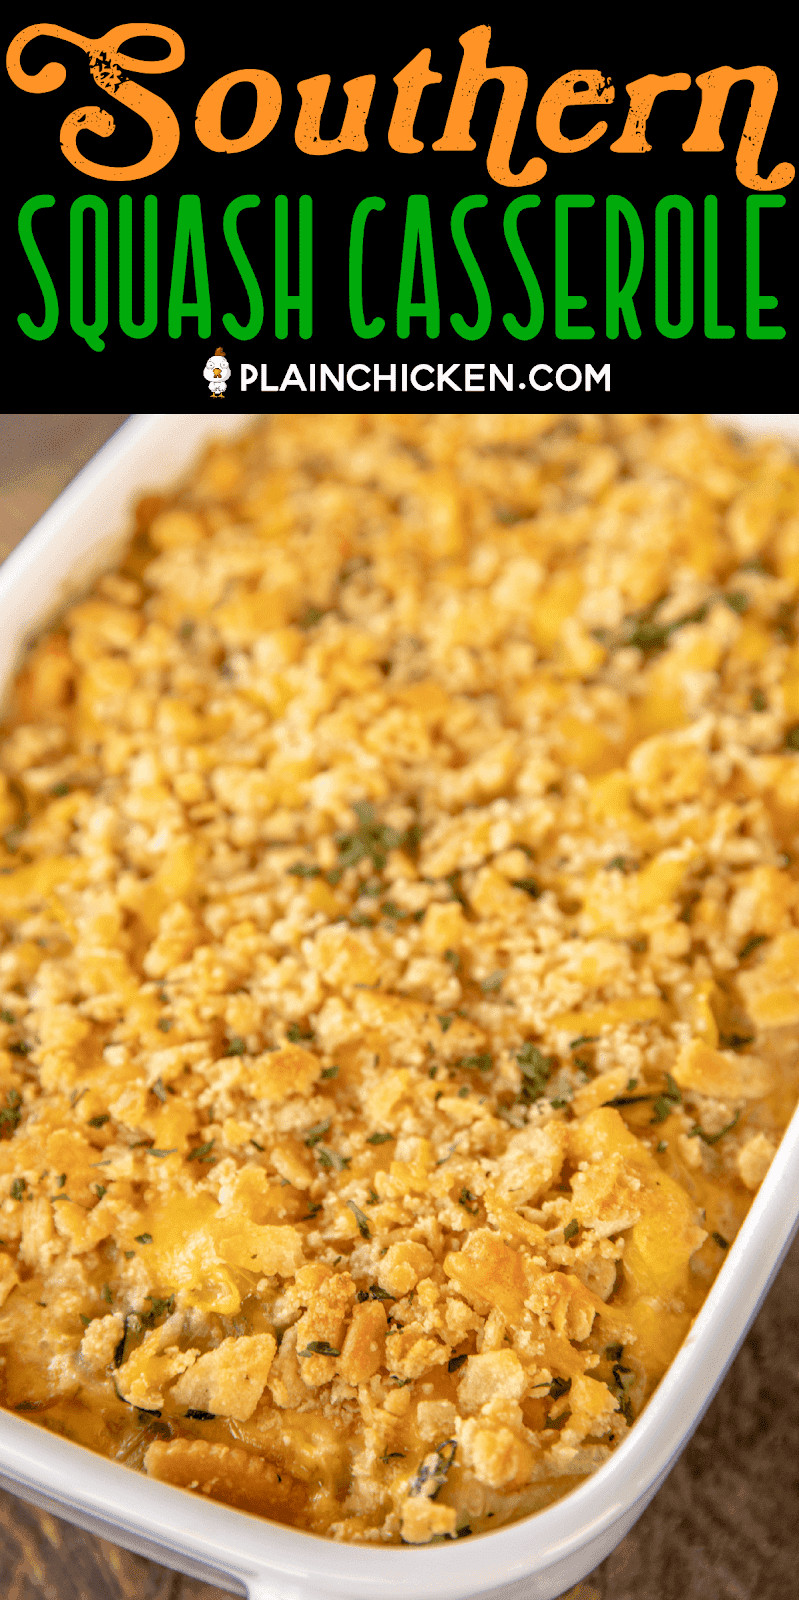 Squash Casserole With Ritz Crackers Lovely Southern Squash Casserole Of Squash Casserole With Ritz Crackers 